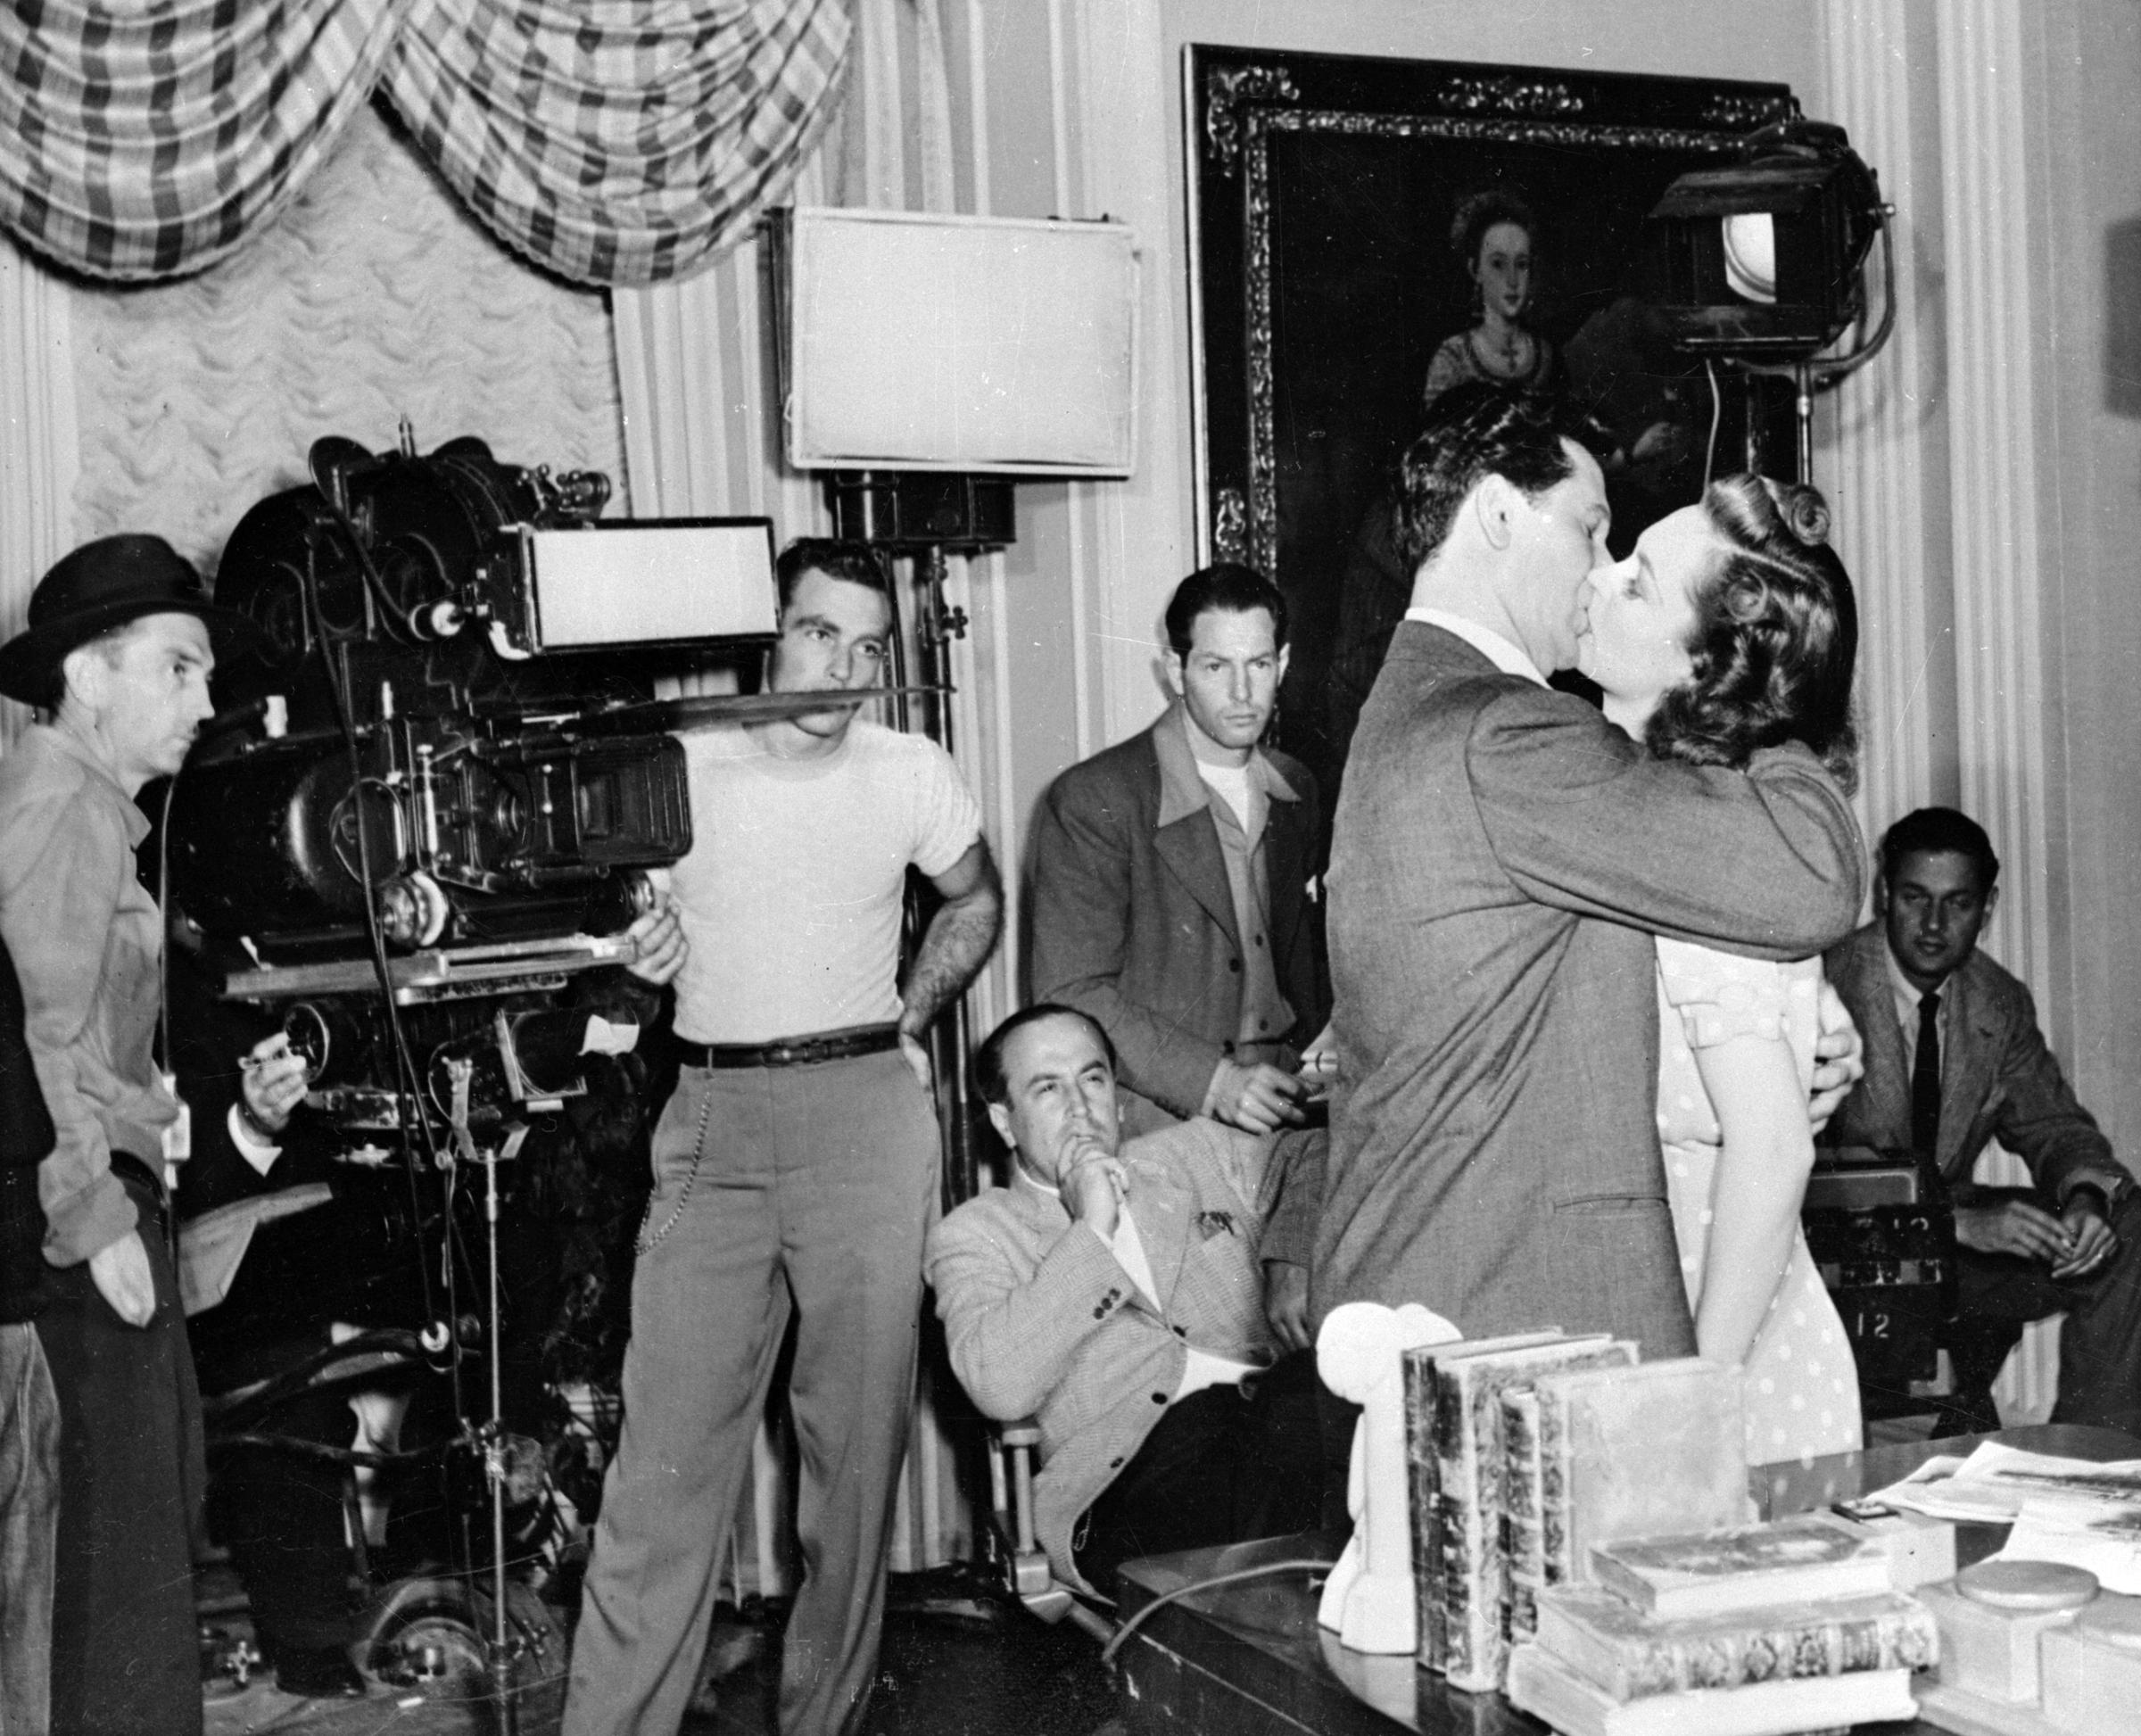 A film crew shoot a kissing scene at the Warner Brothers Film Studios in Hollywood, 1946.